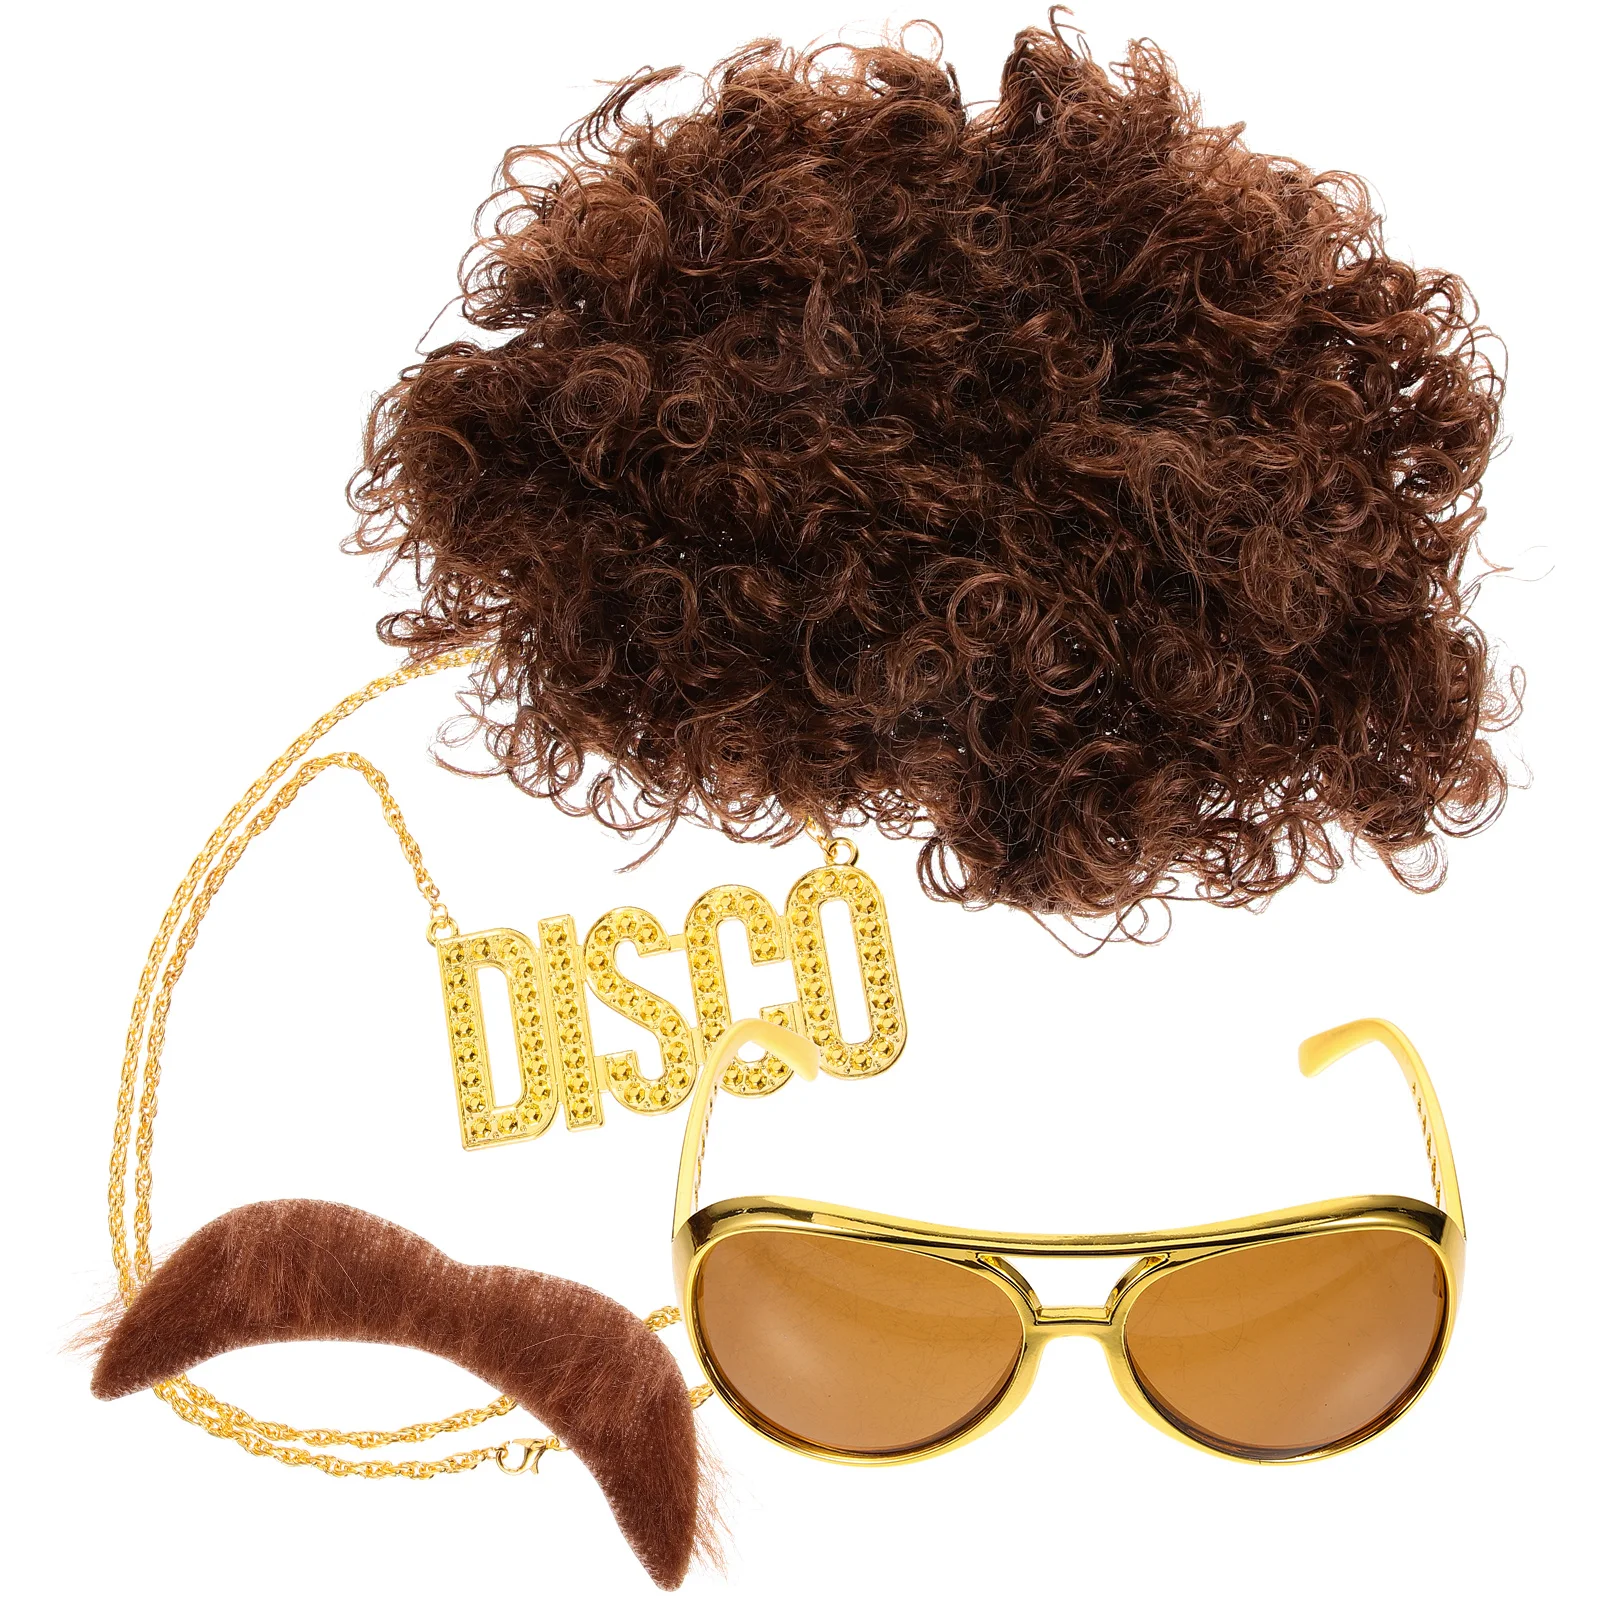 

1 Set Disco Cosplay Costume Disco Party Necklace Chain And Sunglasses Photo Prop Random Style